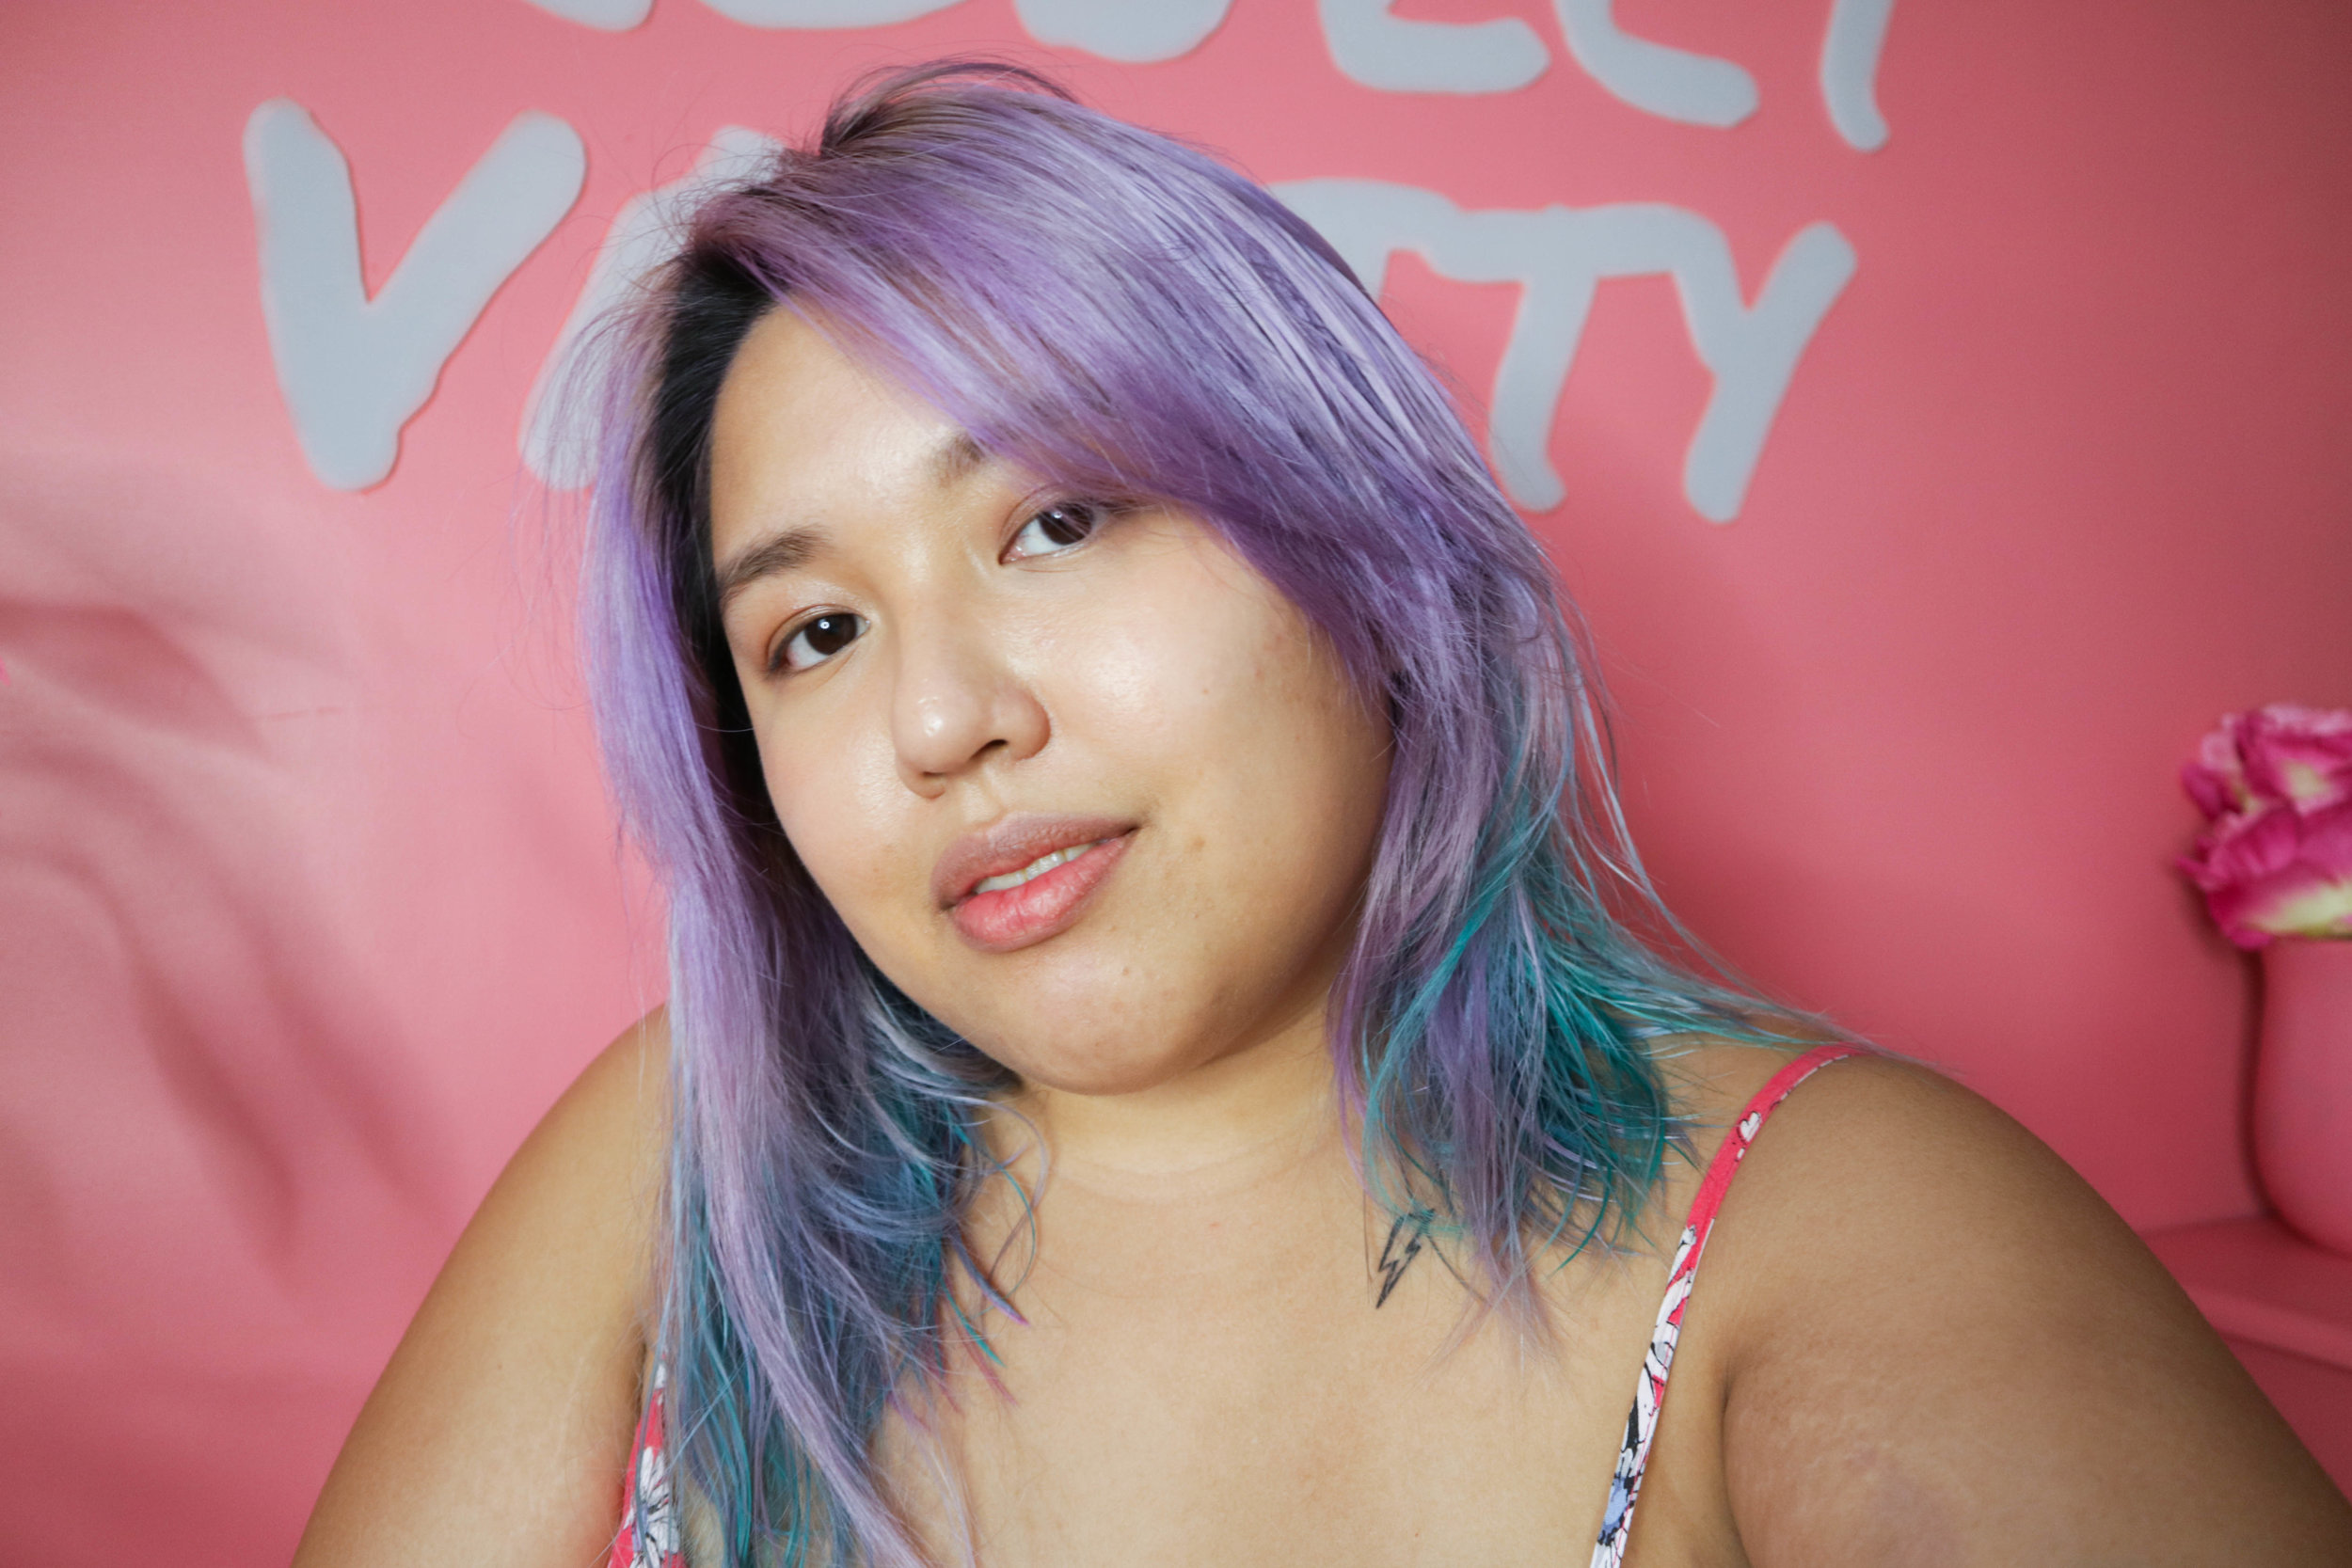 An exhaustive guide to dyeing your hair in 'crazy' colors — Project Vanity